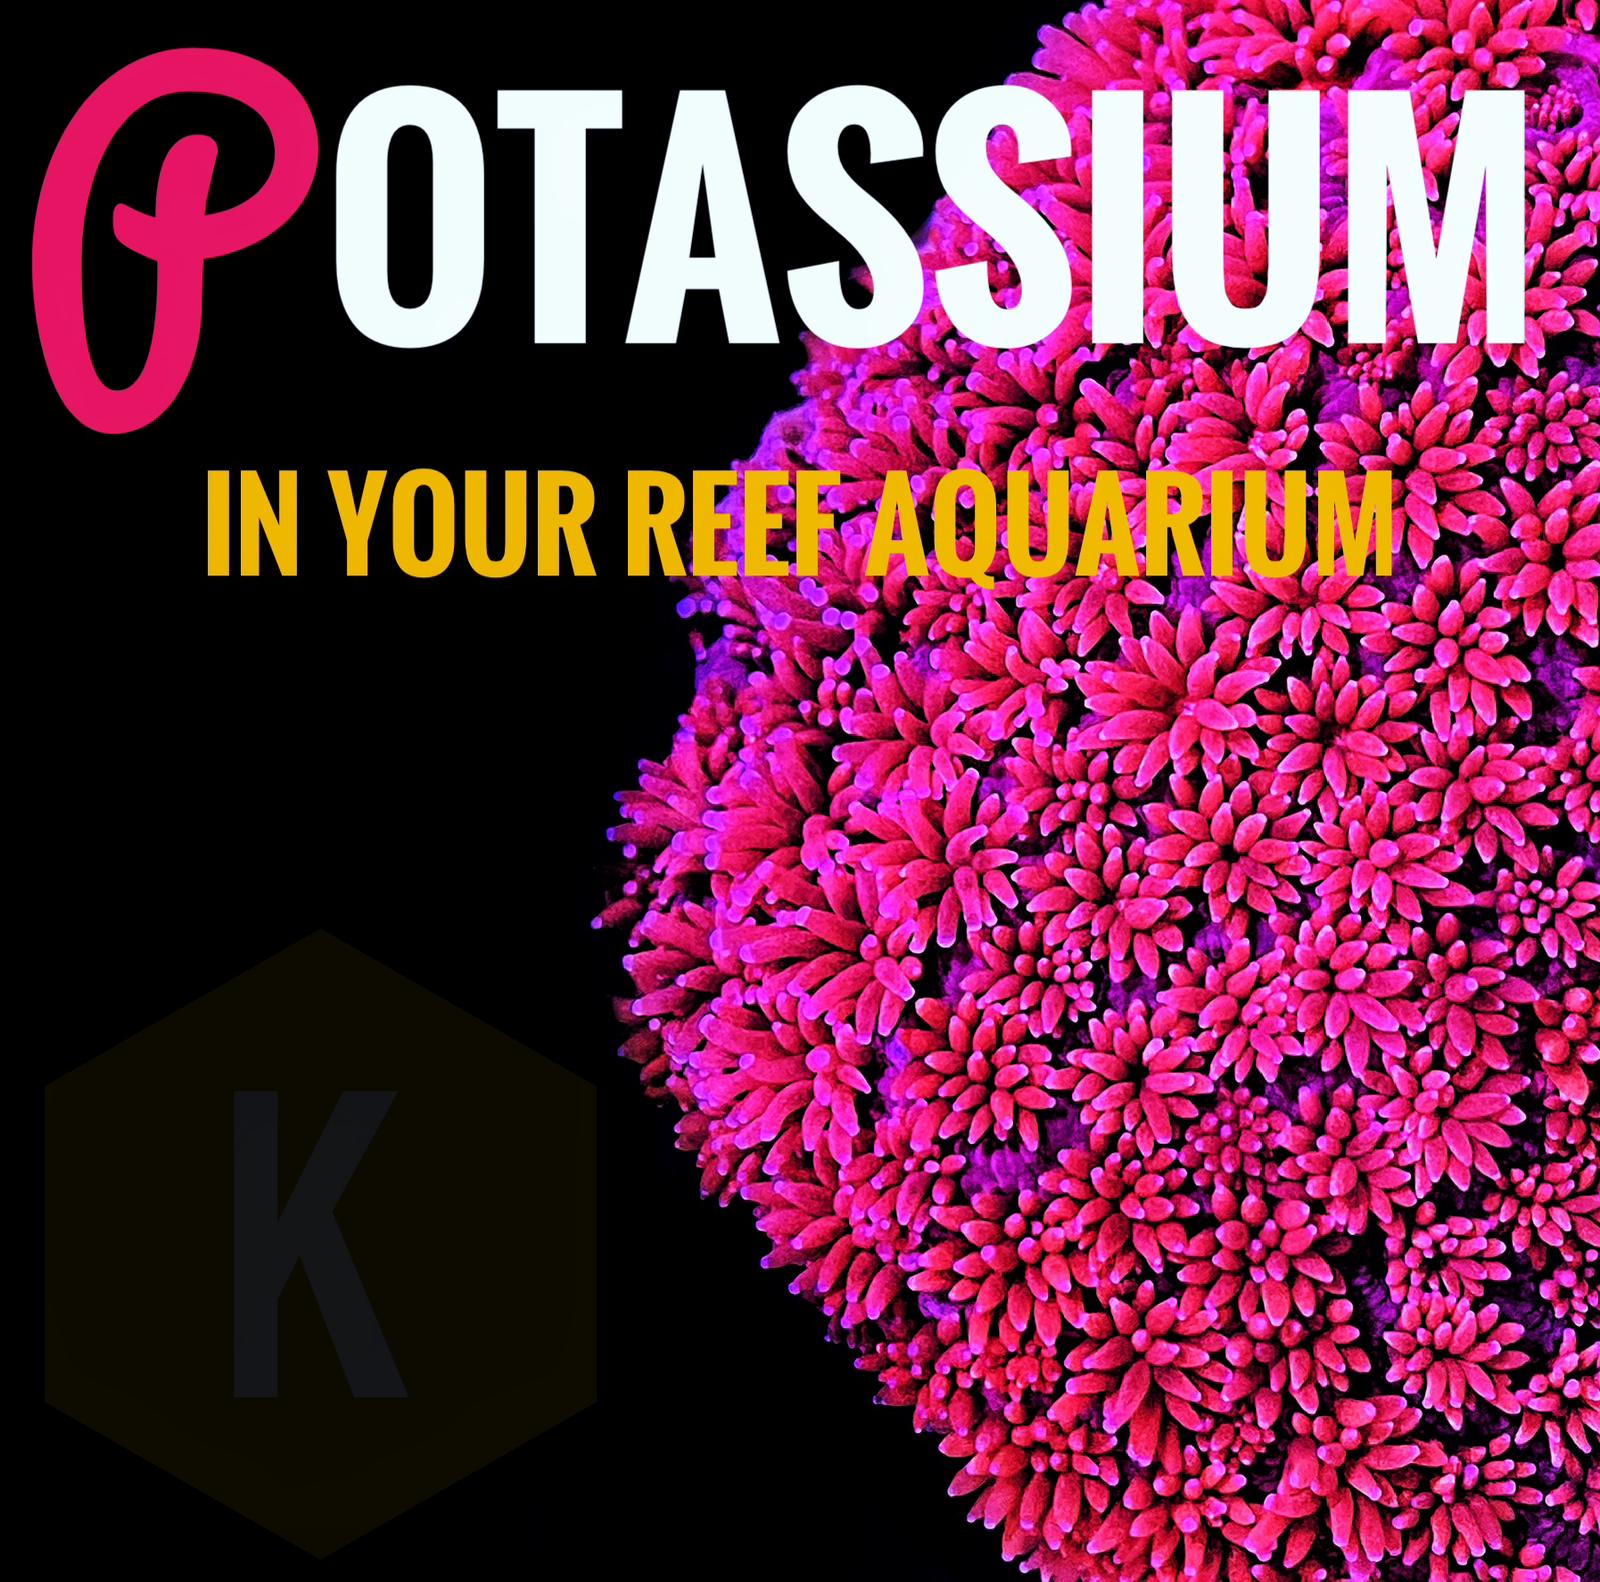 Kalium Lifeblood, The Role of Potassium in Coral Growth